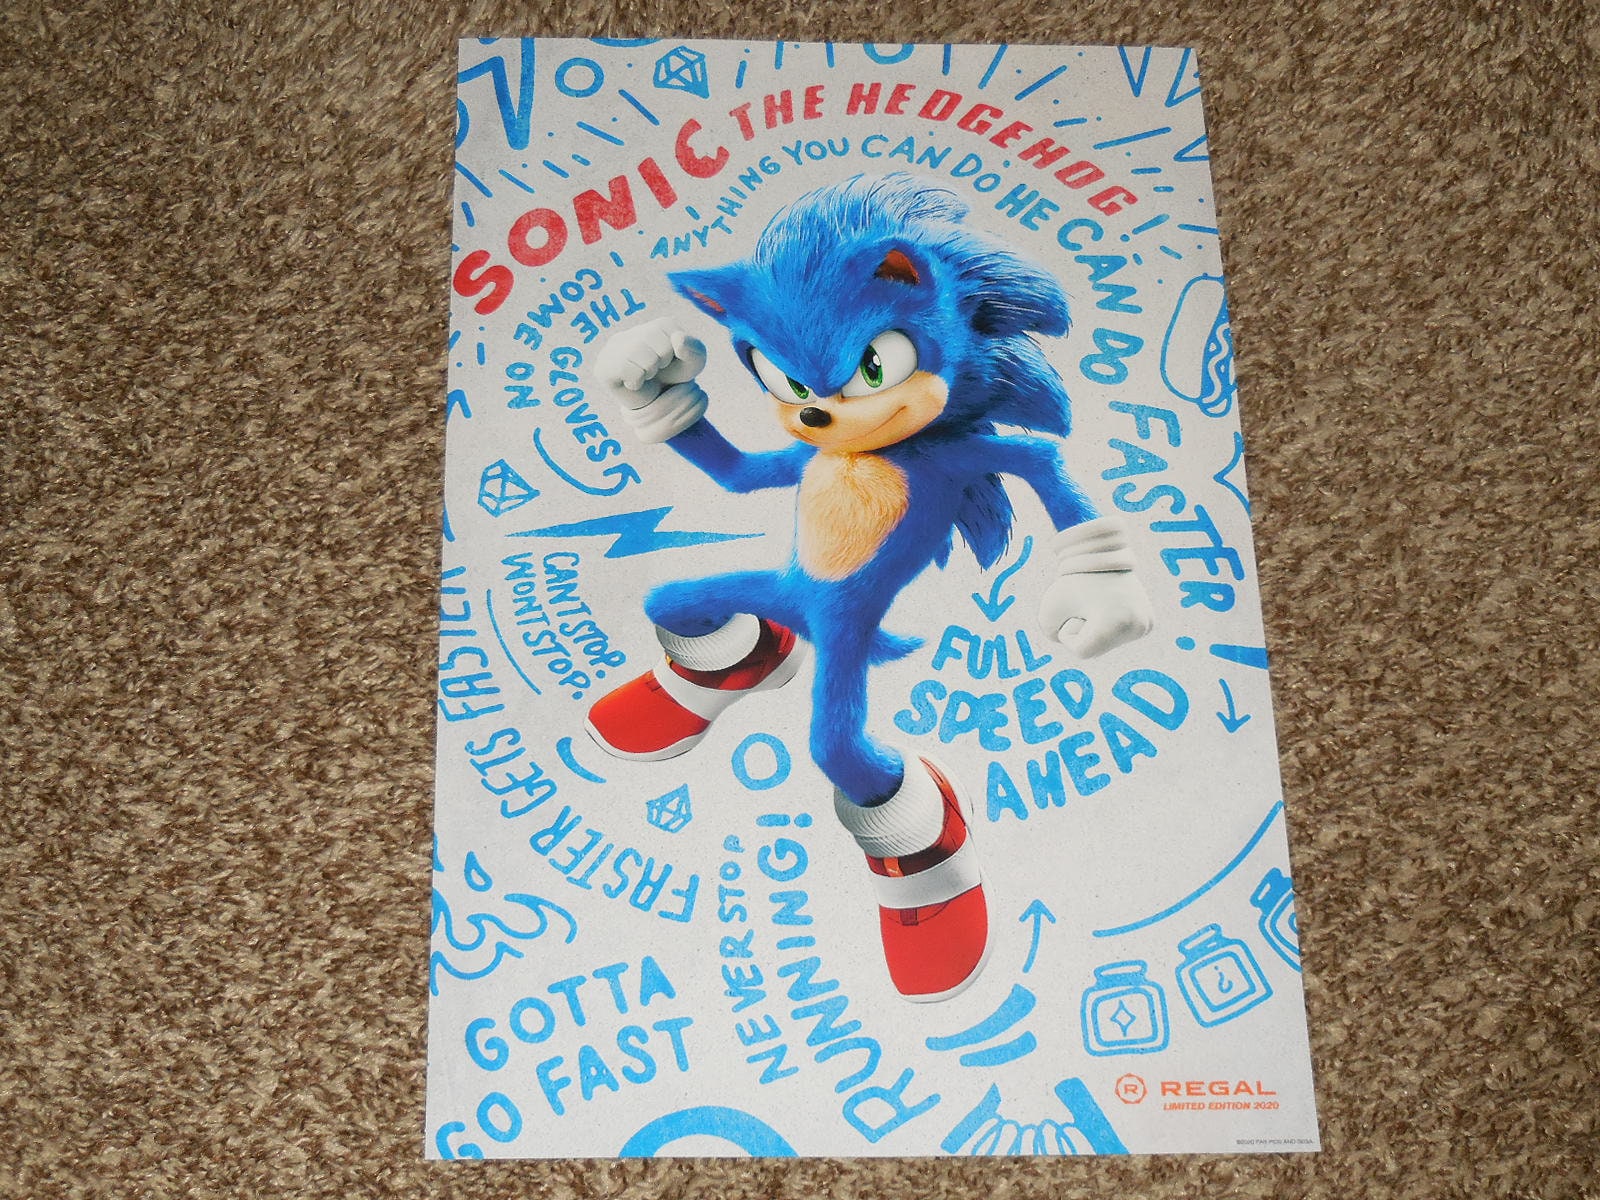 Sonic The Hedgehog 2 movie poster (f) - 11 x 17 inches